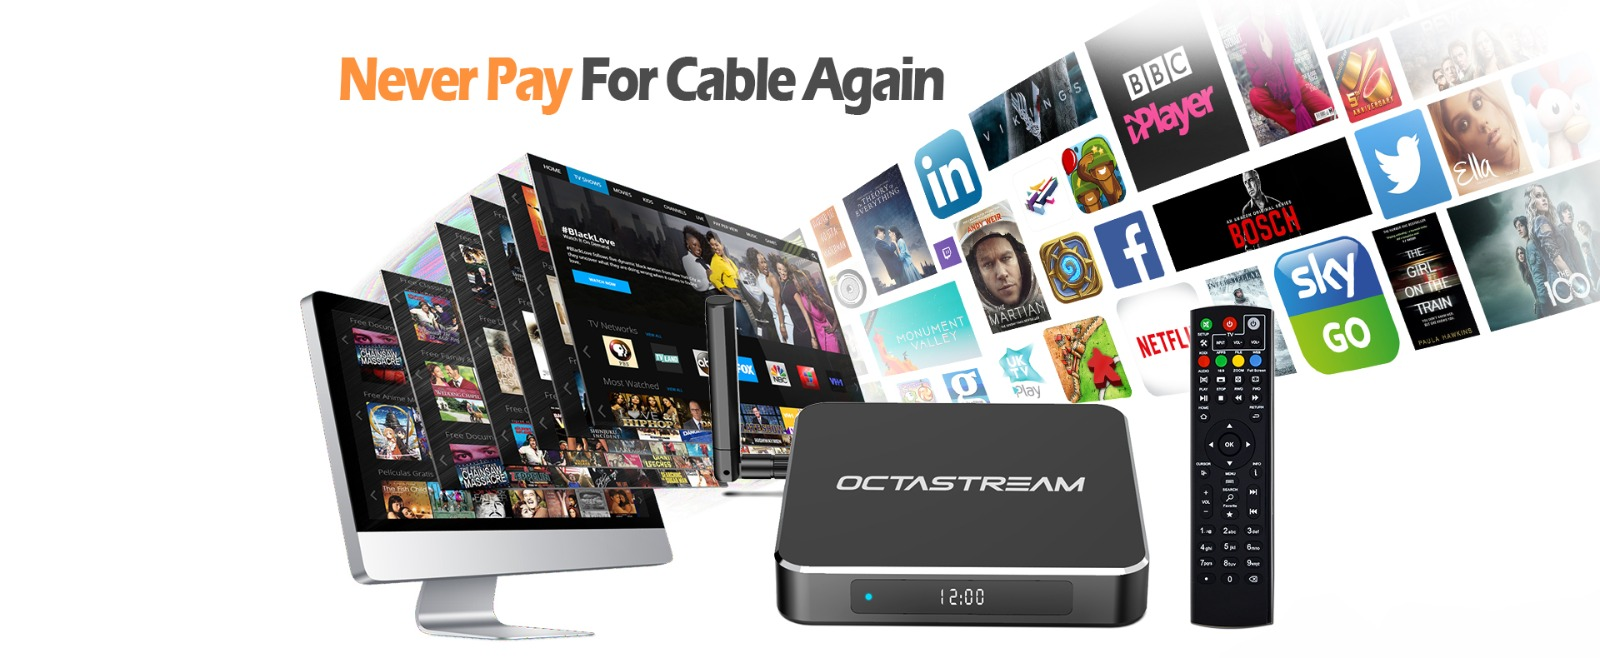 The octastream lifetime iptv Q1 pro android tv box without monthly fee